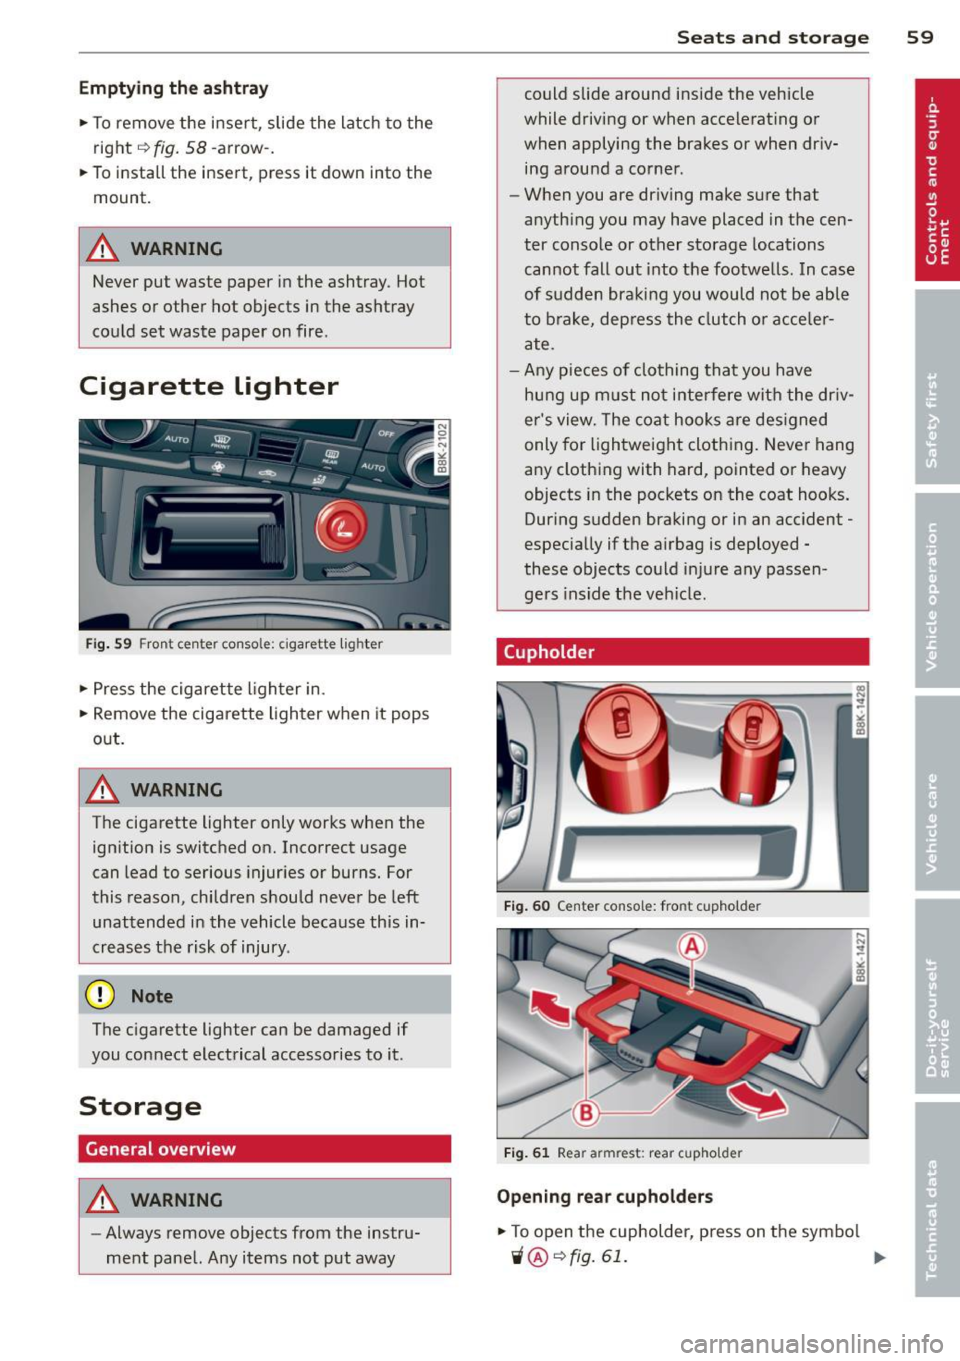 AUDI A5 COUPE 2014  Owners Manual Emptying the  a shtray 
•  To remove the  inse rt,  slide  the  latch  to  the 
right 
r:!) fig. 58 -arrow-. 
•  To insta ll  the  insert,  press  it down  into the 
mount. 
A WARNING 
Never put  